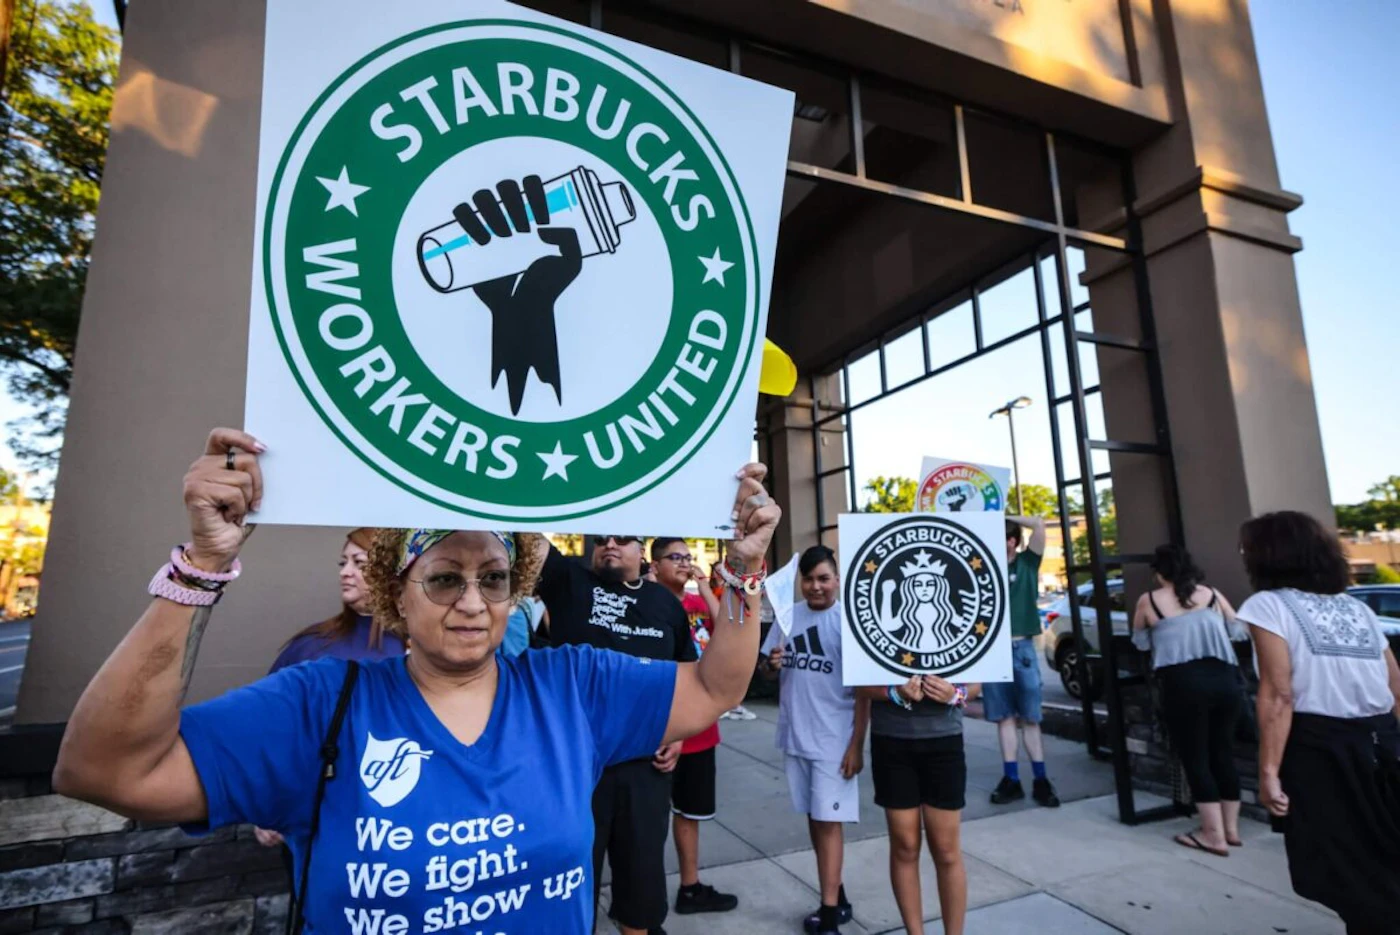 Great Neck, N.Y.: A woman holds up a sign as she joins other protestors in a rally against what they perceive to be union busting tactics, outside a Starbucks in Great Neck, New York,  demanding the reinstatement of a former employee on August 15, 2022. (Photo by Thomas A. Ferrara/Newsday RM via Getty Images)